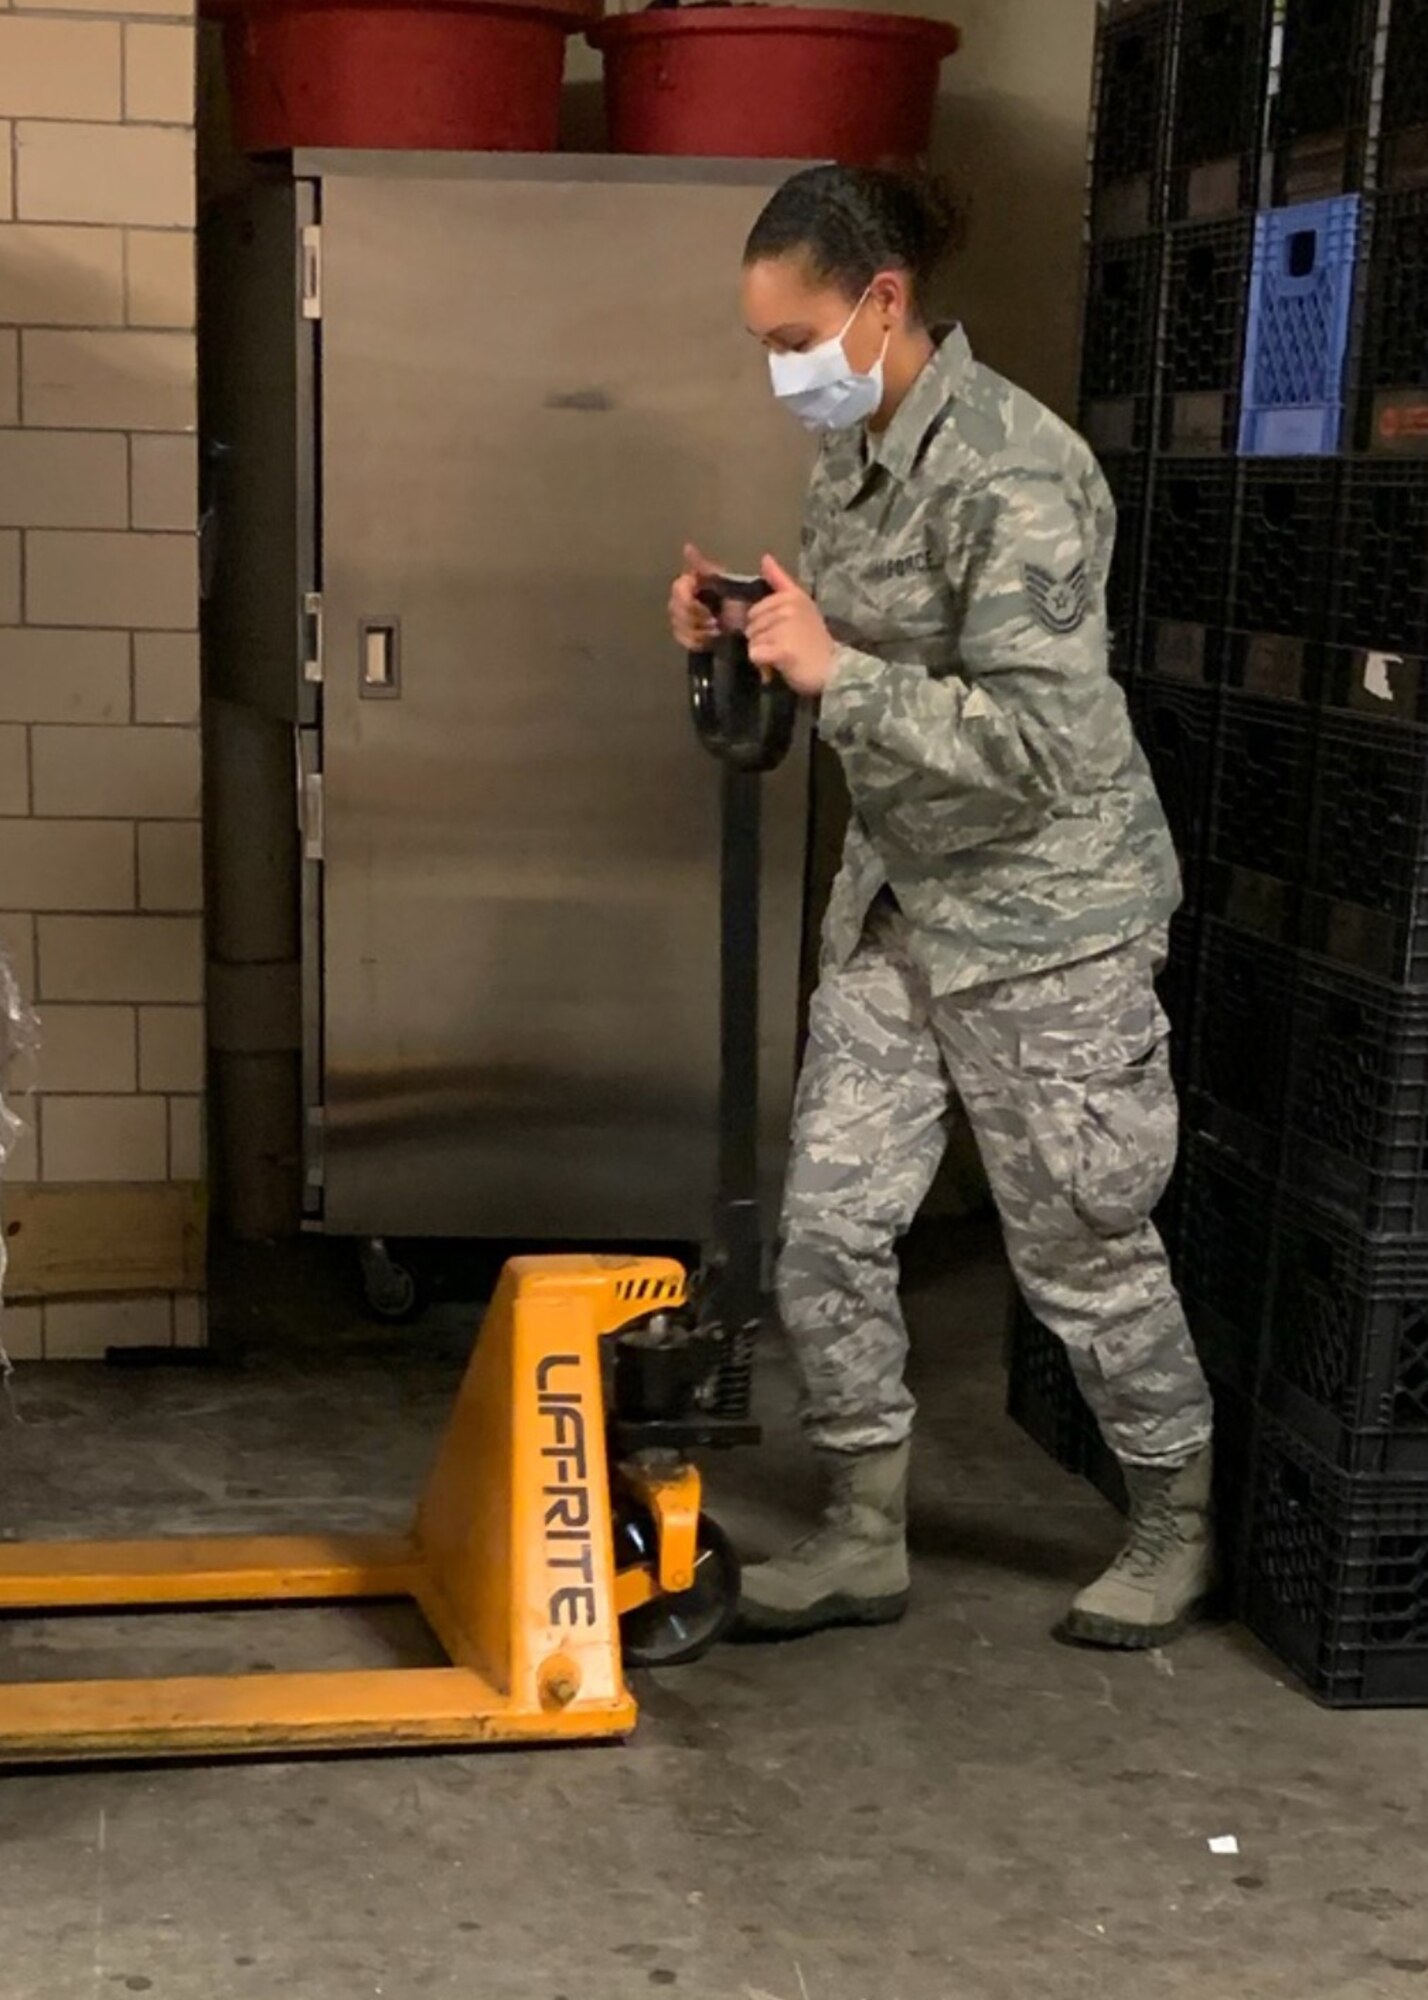 More than 50 members of the 104th Fighter Wing, Barnes Air National Guard Base, Mass., are on orders and leading the way to help the Commonwealth in response to the COVID-19 pandemic. Technical Sgt. Felecia Yager, a personnelist in the 104th Force Support Squadron, has been put on orders and is at the forefront of the mission, looking out for her fellow Airmen to make sure they are good to go, administratively. (Courtesy photo)